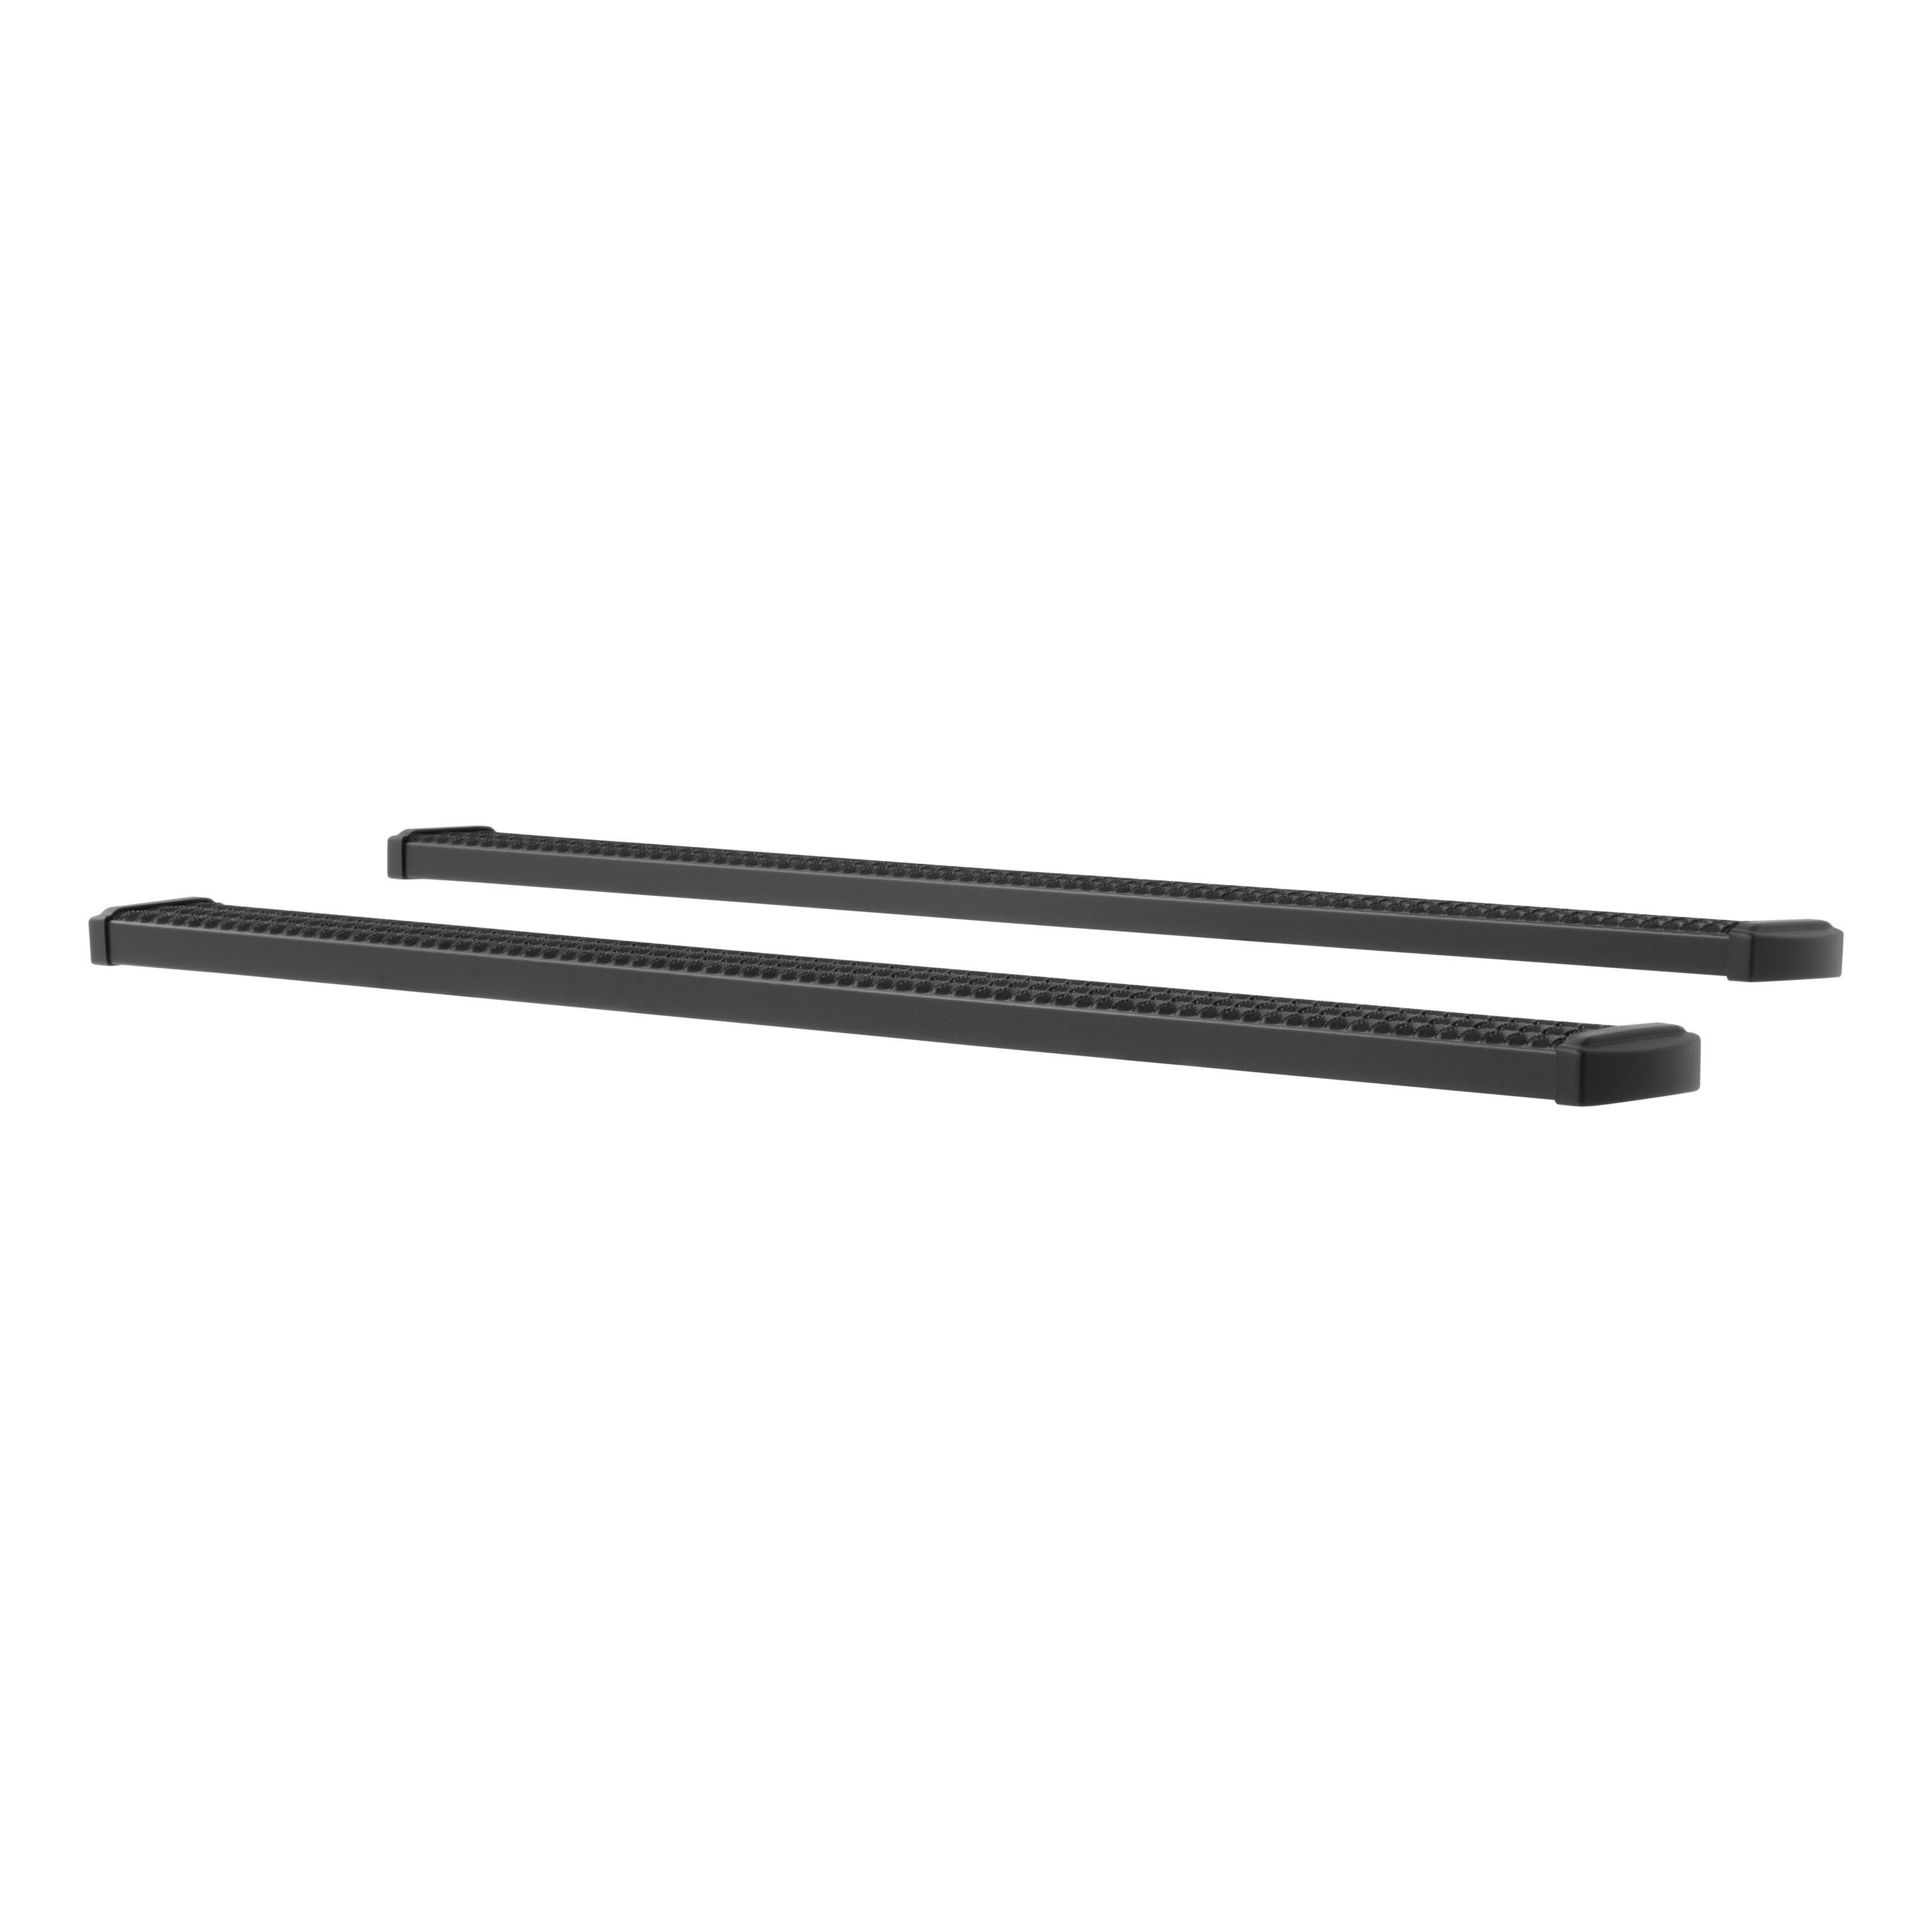 LUVERNE 415088-401723 Grip Step 7 inch Running Boards